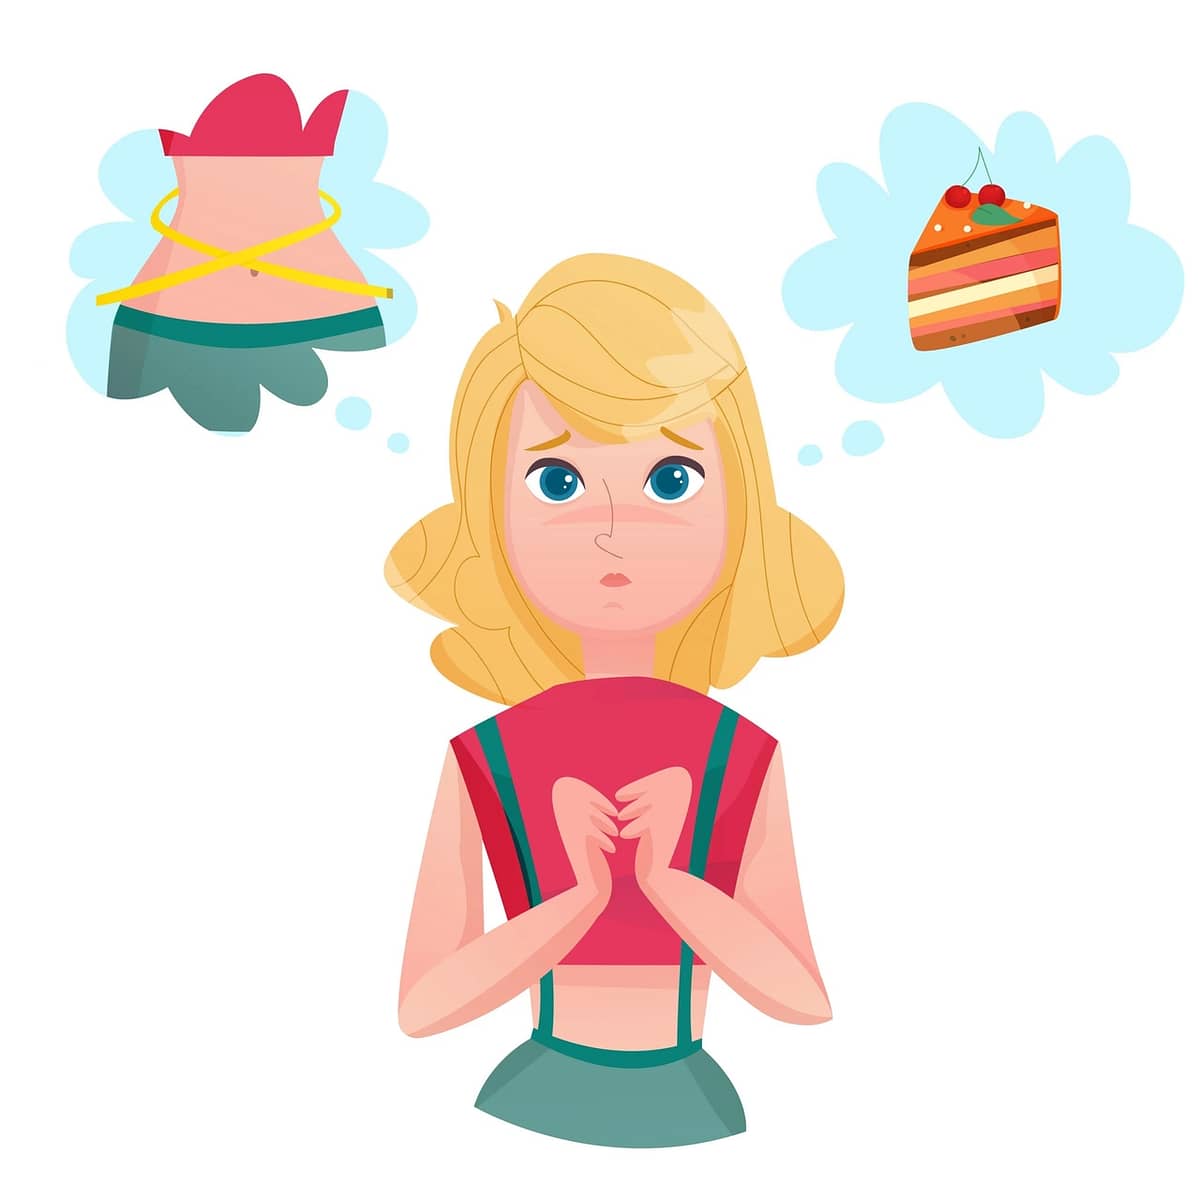 Young lady cartoon character dieting to loose weight dreaming of cake and slim figure temptation emotions vector illustrations